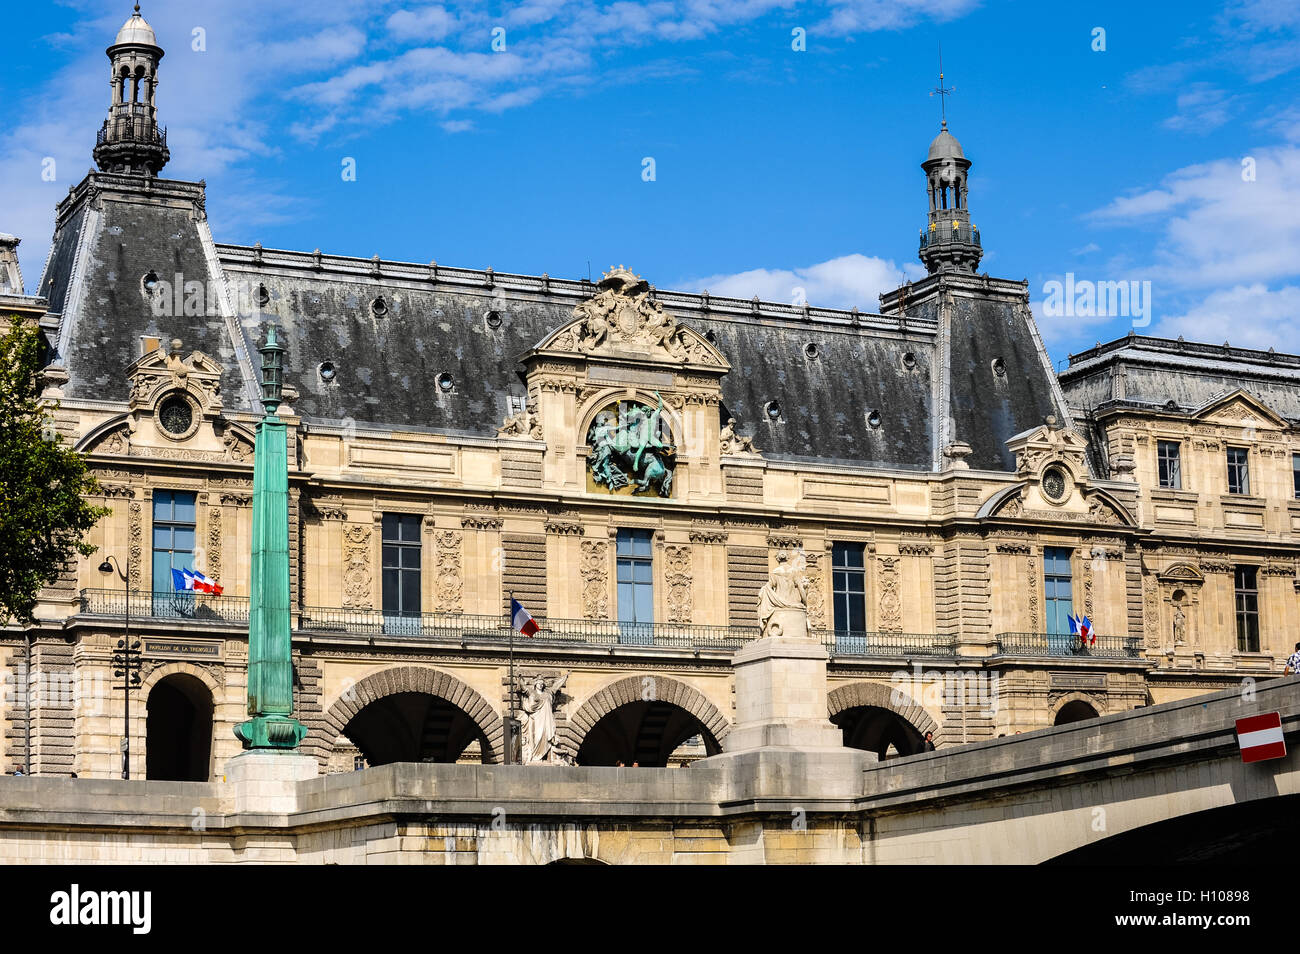 Paris, France. View from a boat on the river Seine. The Louvre is one of the world's largest museums. Stock Photo